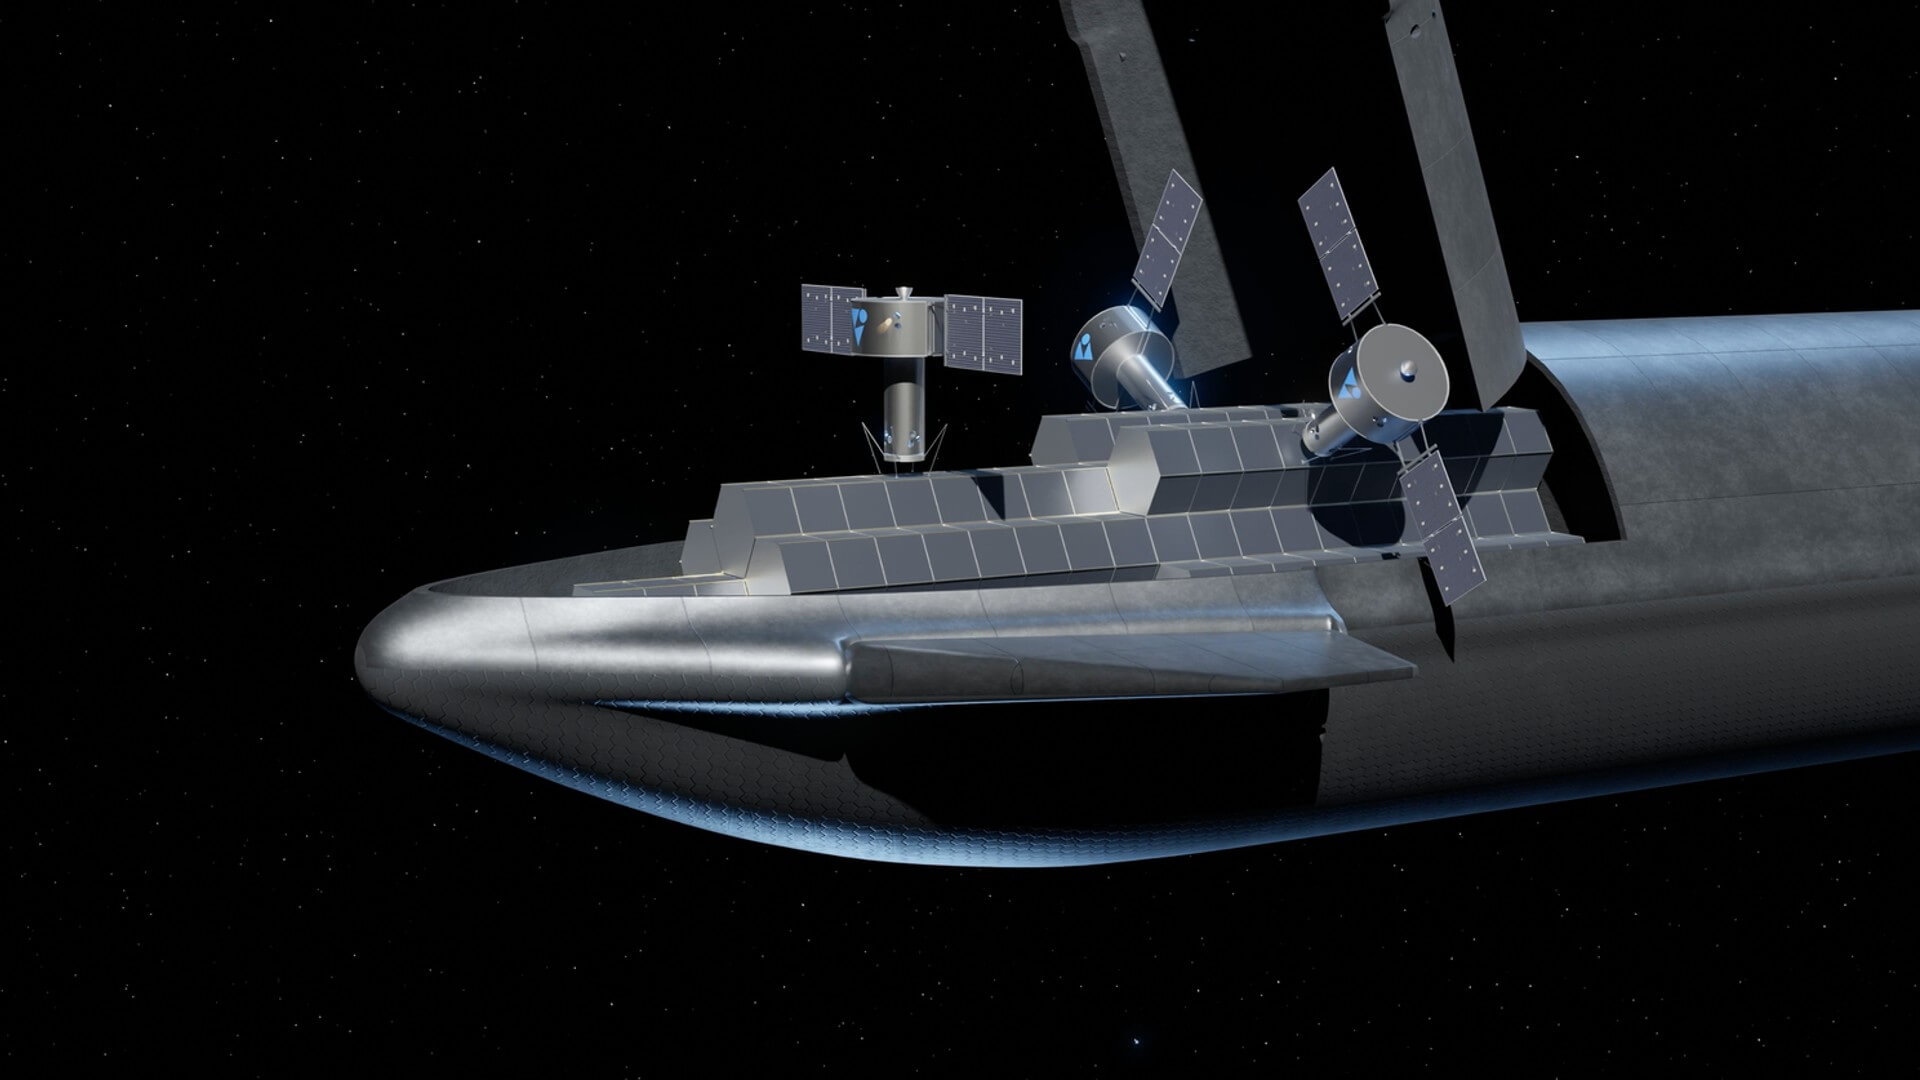 An illustration of a SpaceX Starship deploying several orbital manufacturing satellites in space.